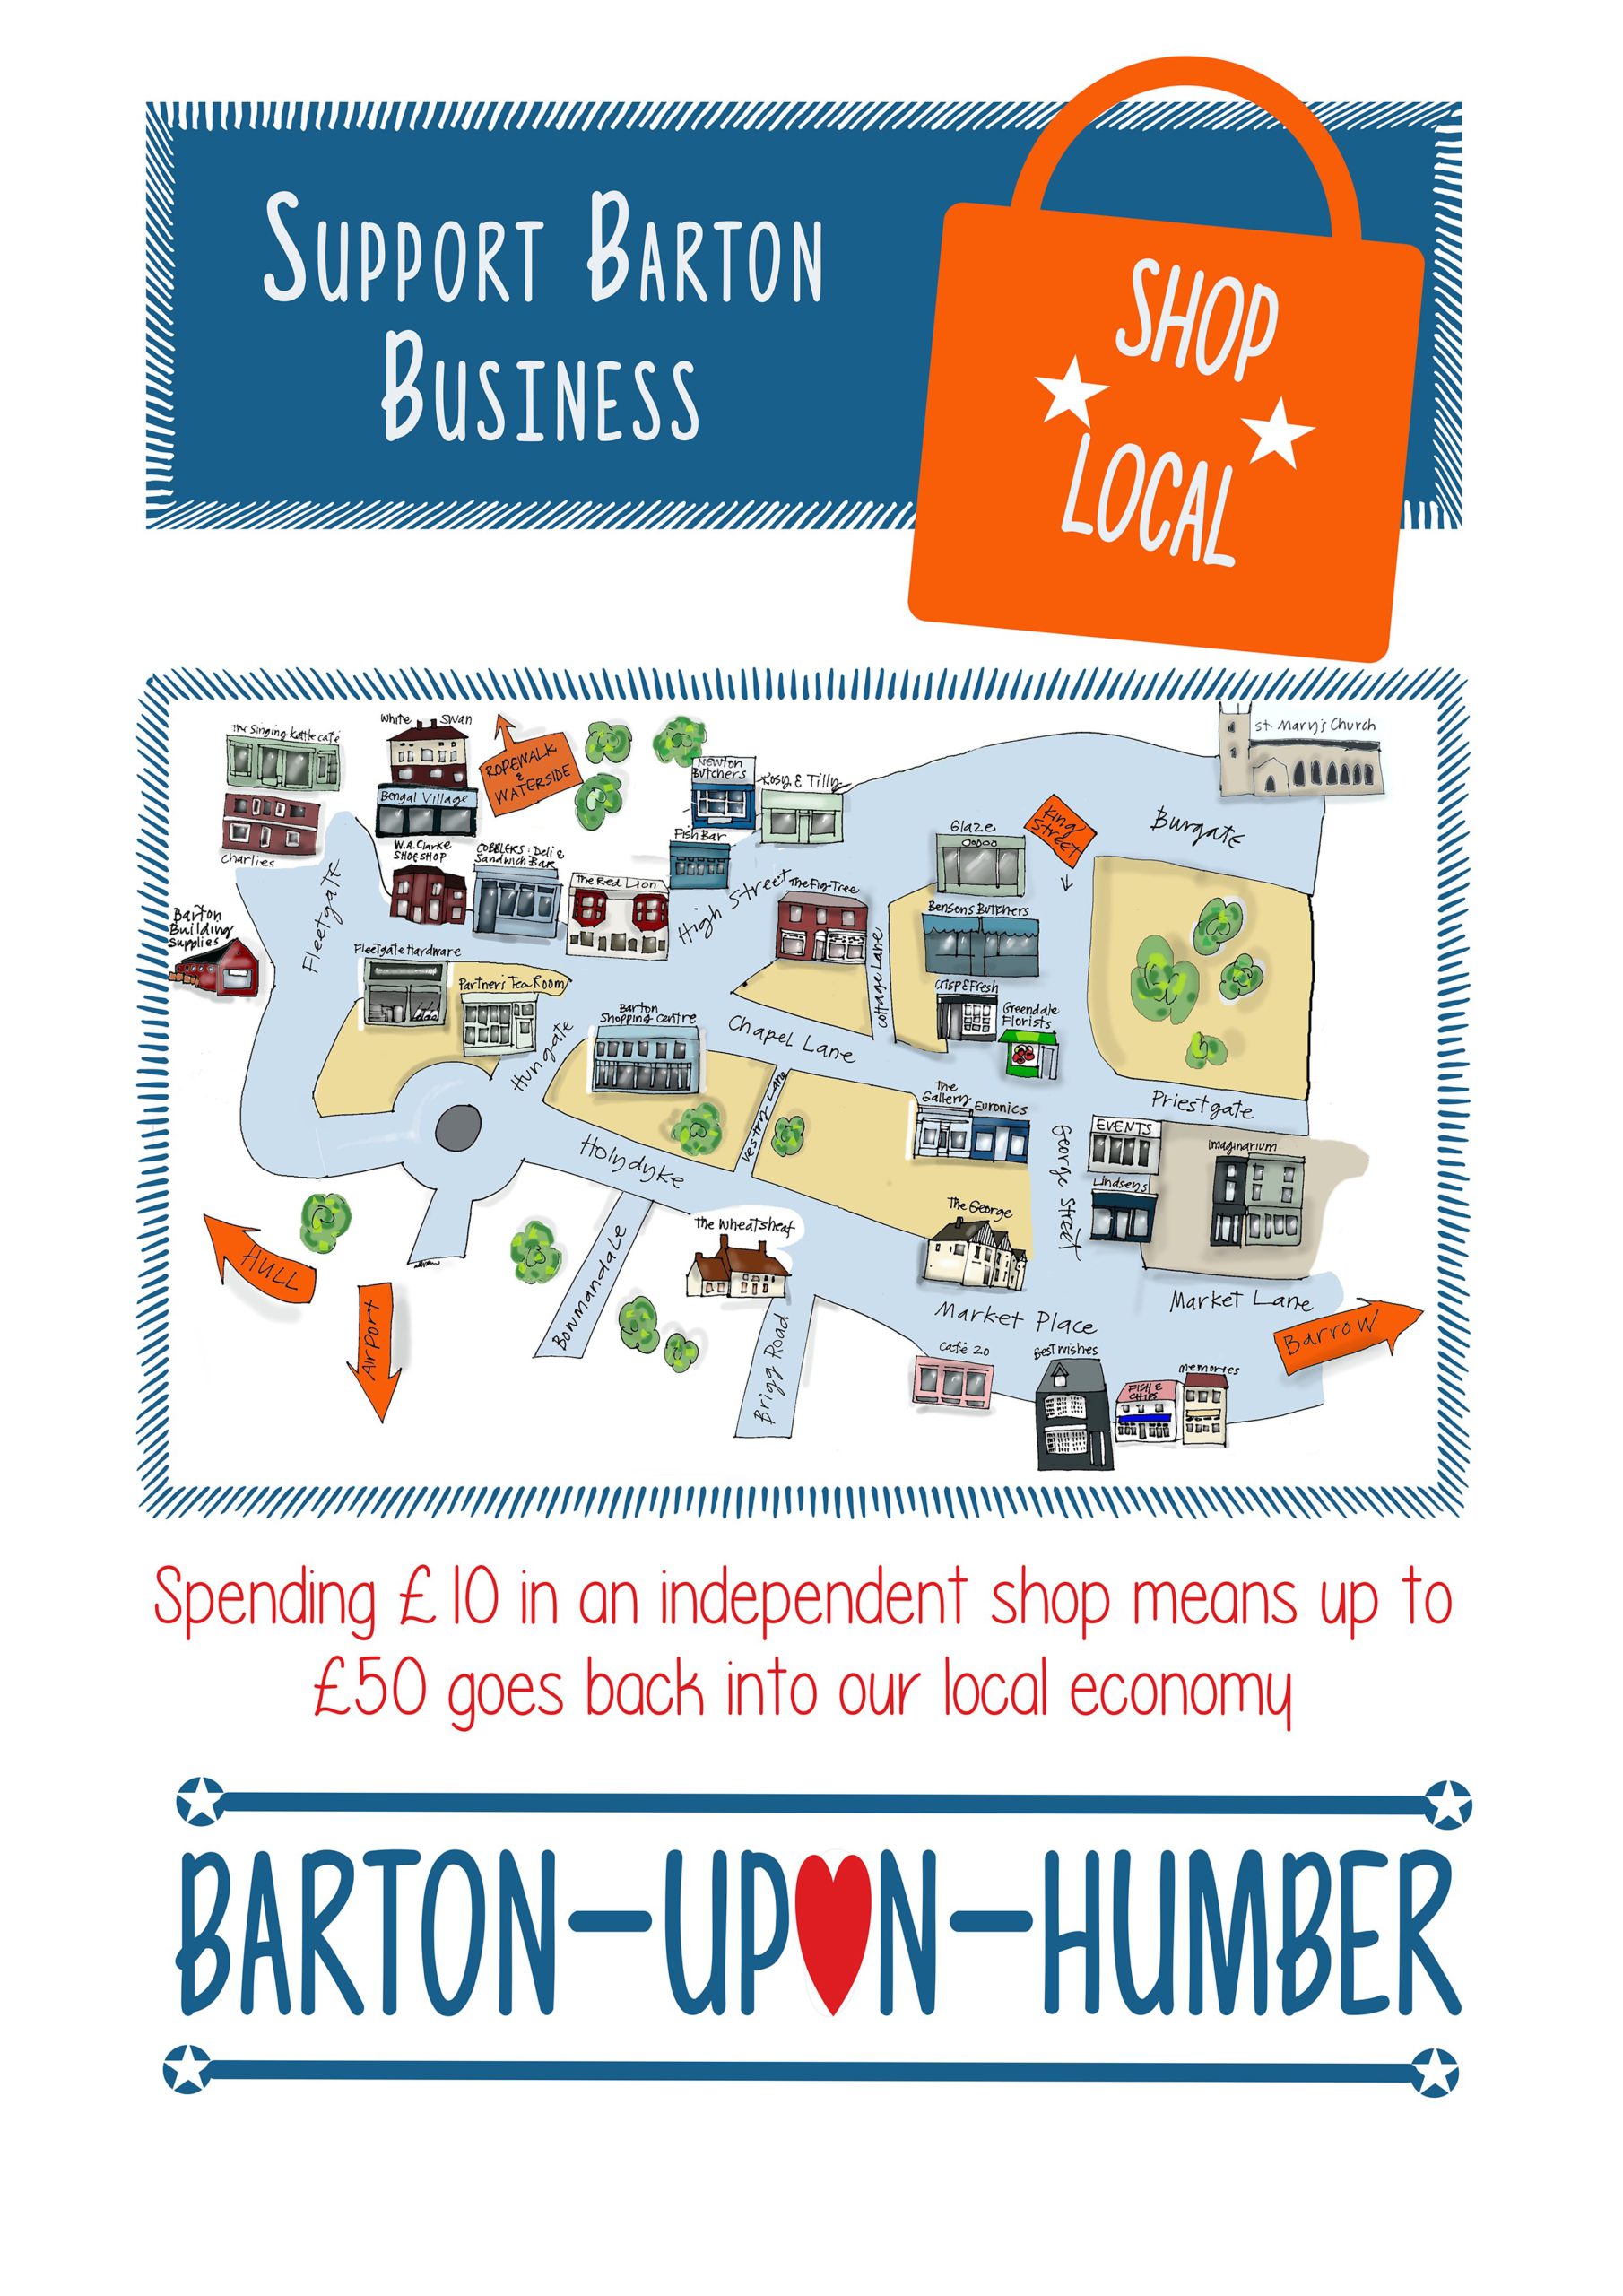 Shop Local – Support Barton Business